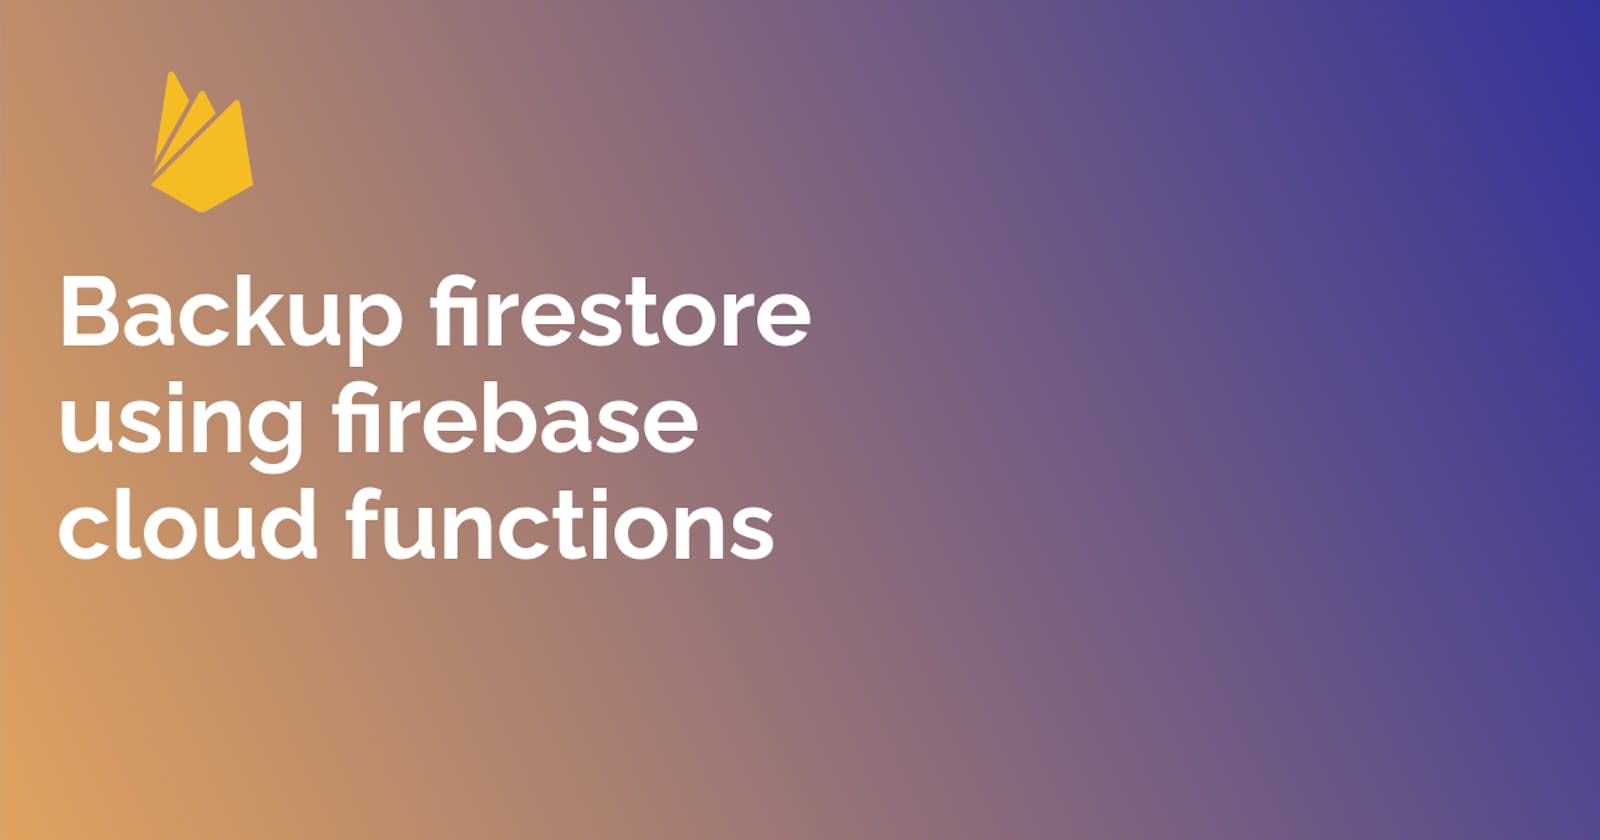 How to backup Firestore using firebase cloud functions